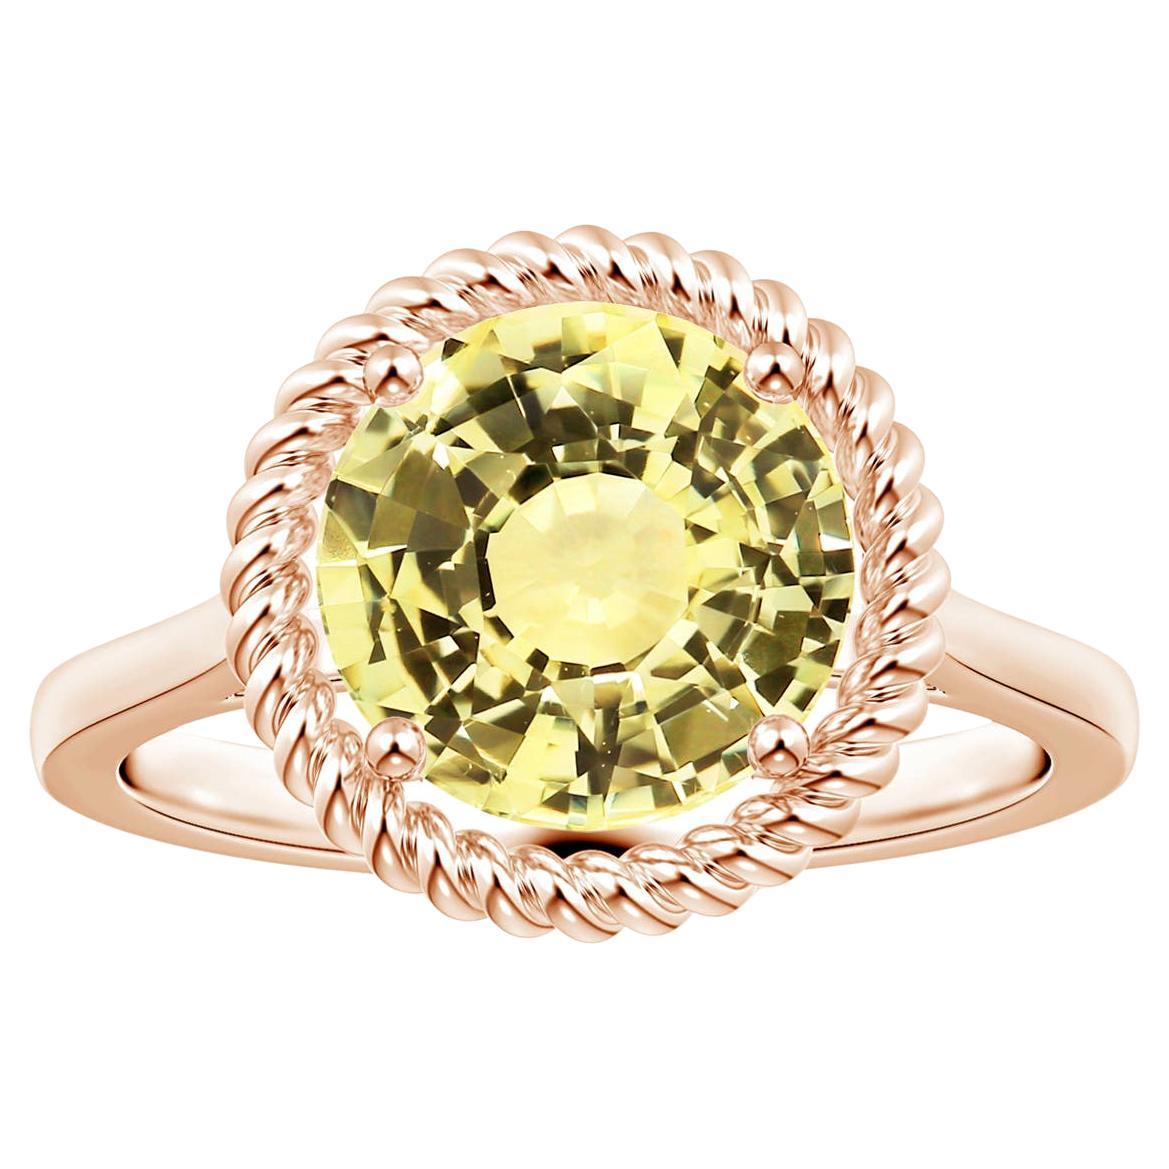 Angara Gia Certified Natural Yellow Sapphire Halo Ring in Rose Gold